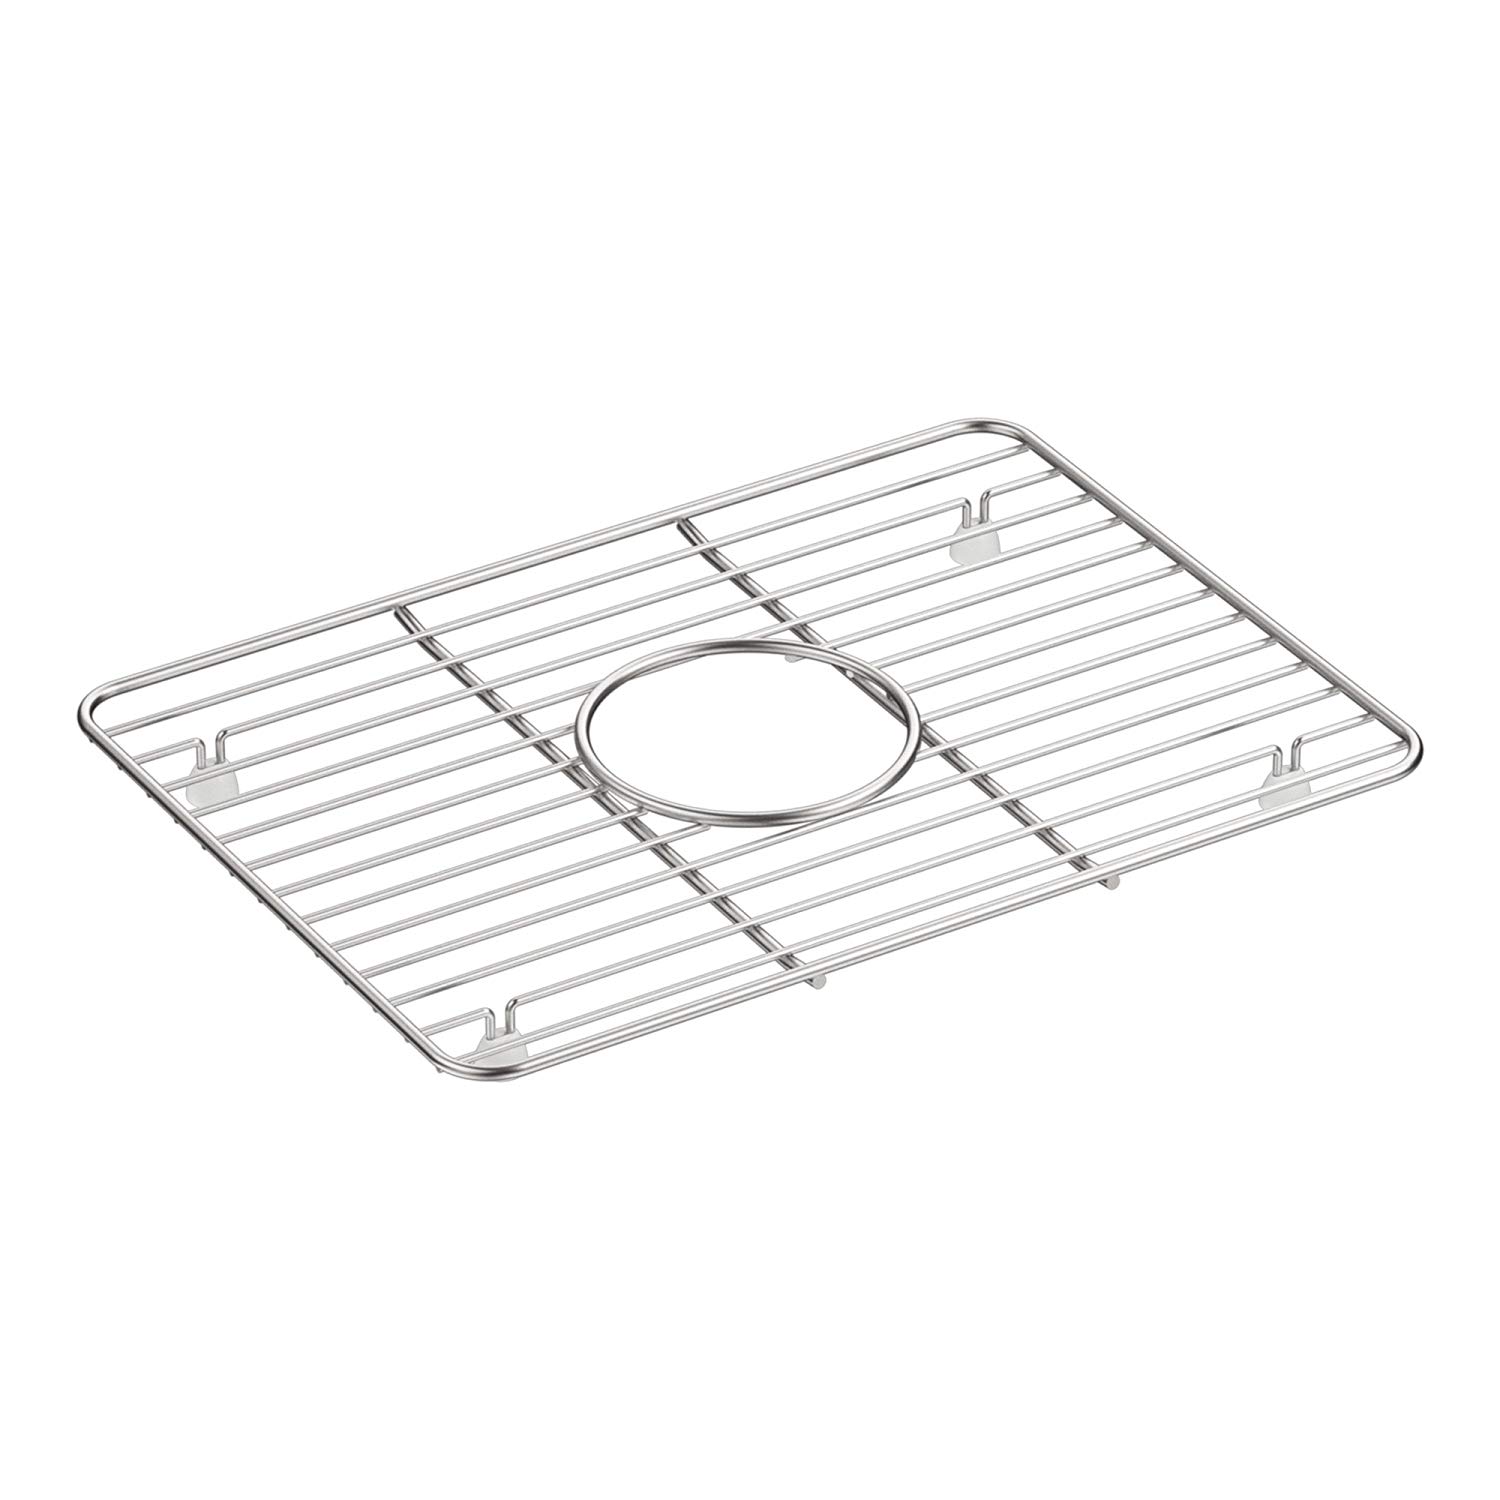 Cairn 10-3/8x14-1/4" Stainless Steel Small Bowl Sink Rack